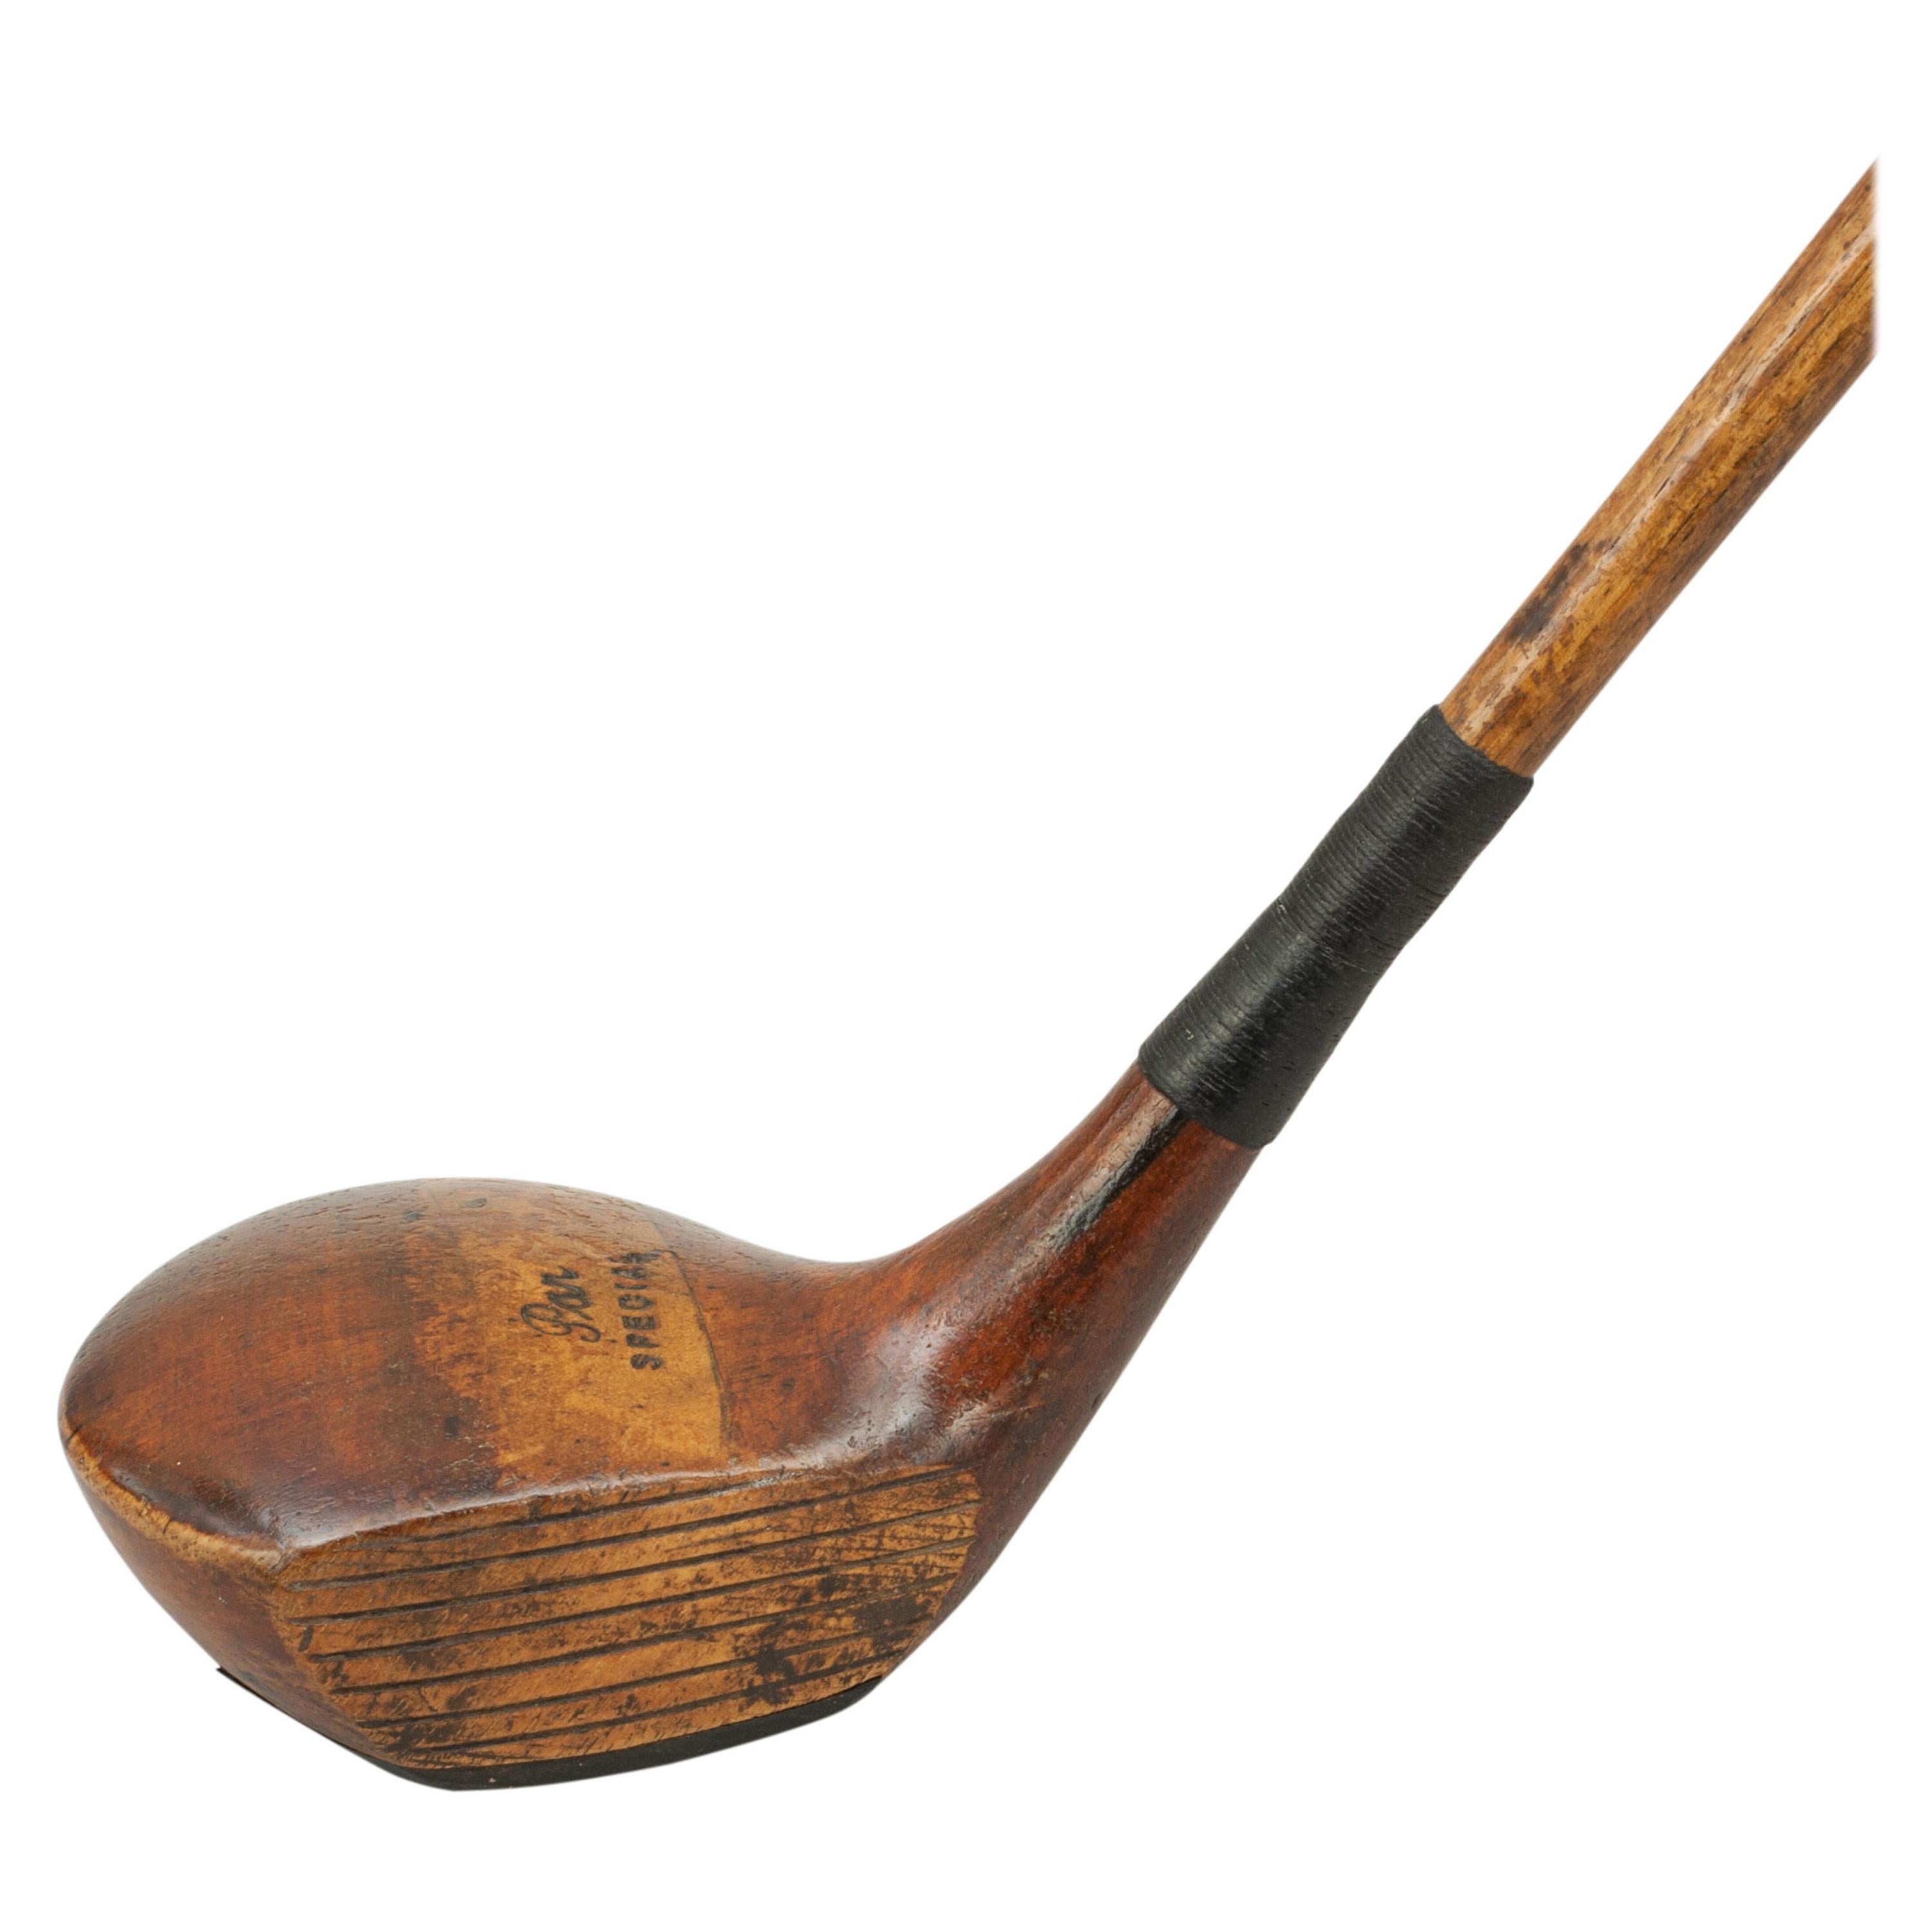 Hickory Shafted golf club, 'Par' driver.
A good original persimmon wood socket head driver with hickory shaft and polished leather grip. The head marked 'Par' 'Special' with lead weight to the rear and extra lead in the sole. It has a face insert